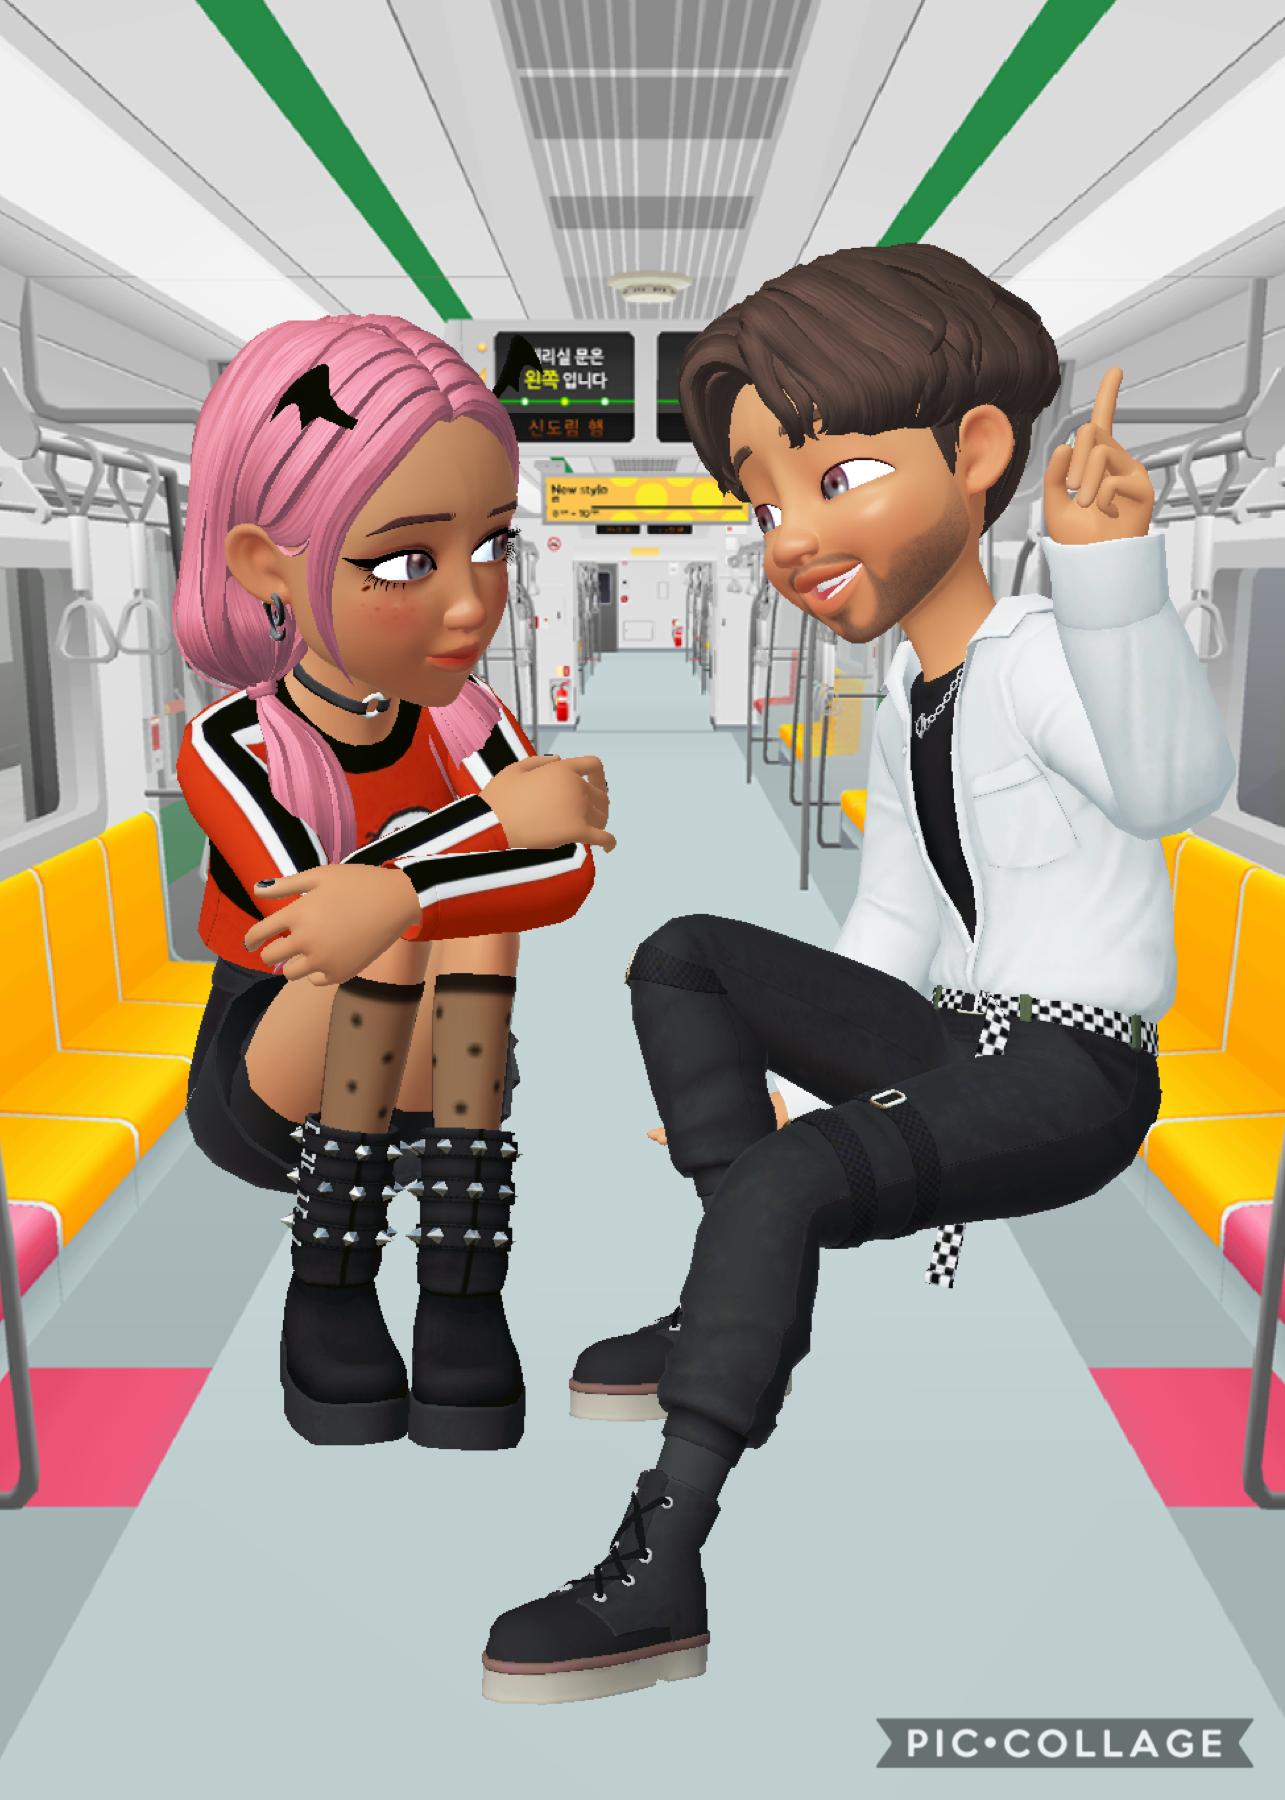 I got 4,000 coins on zepeto also me and my friends have been playing Minecraft so lately. We are finally ready to beat the Ender dragon. 